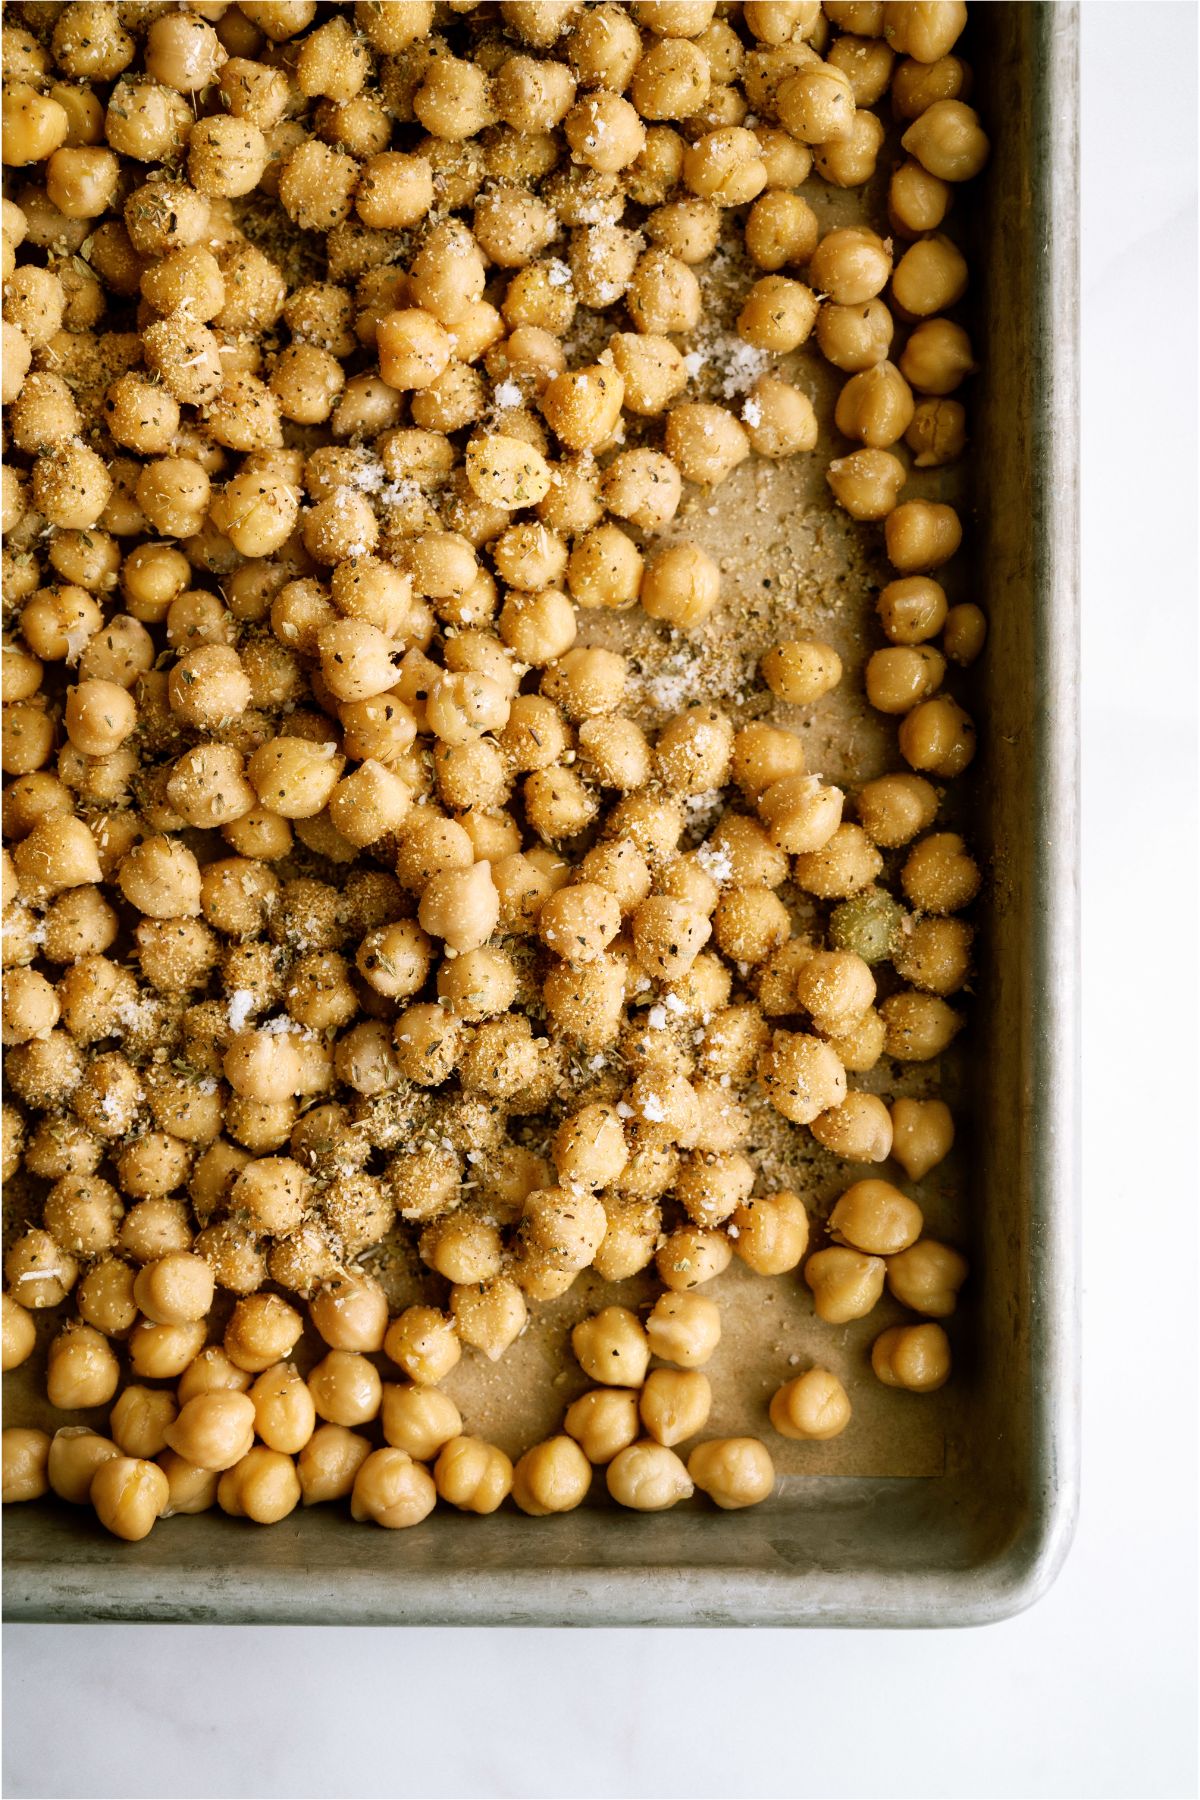 Toasted Chickpeas on a sheet pan